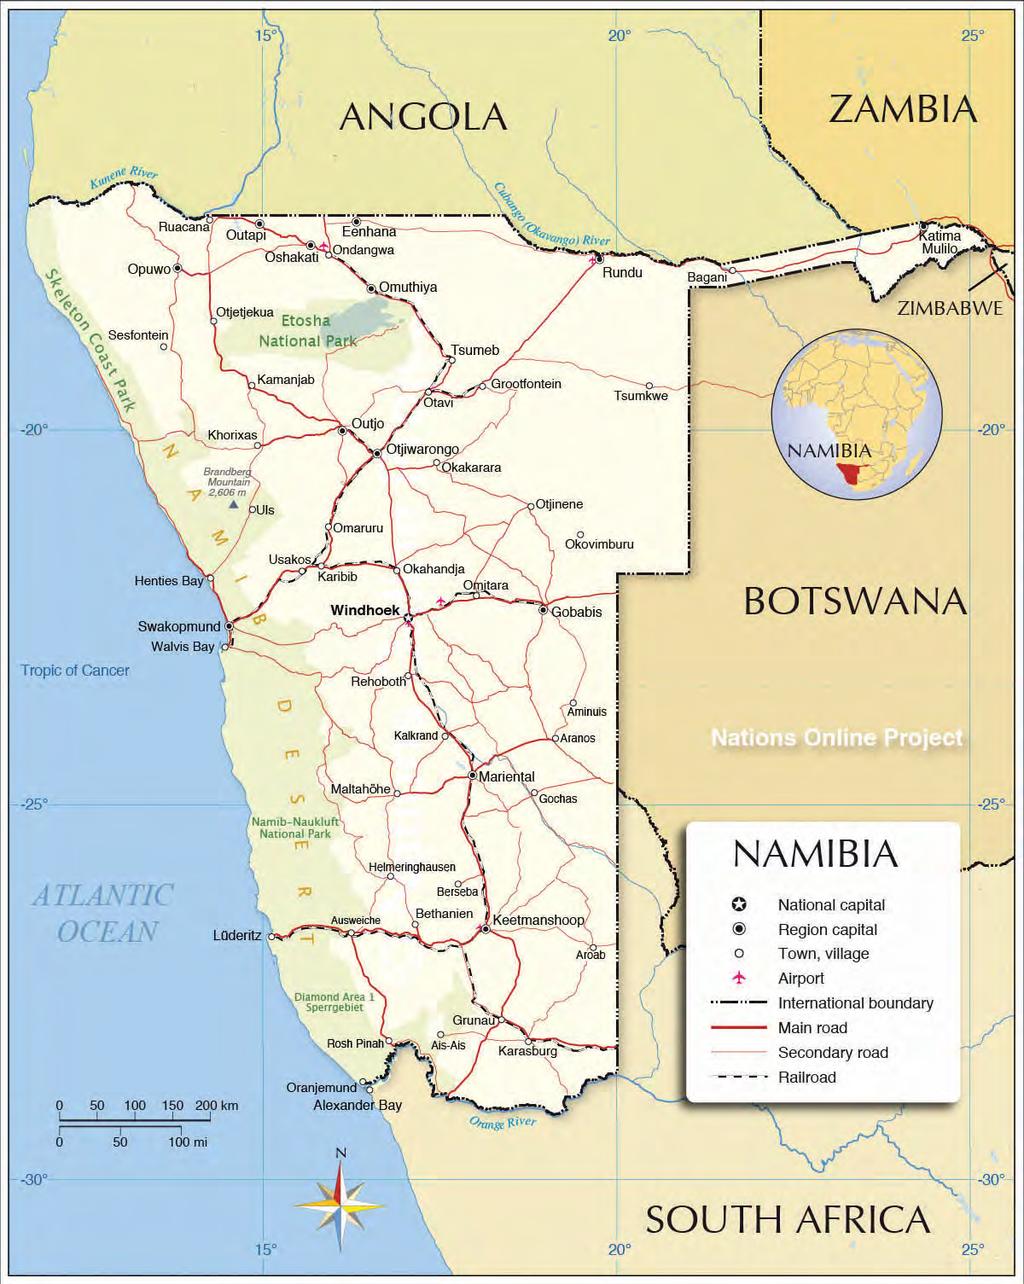 Political map of Namibia Source: www.nationsonline.